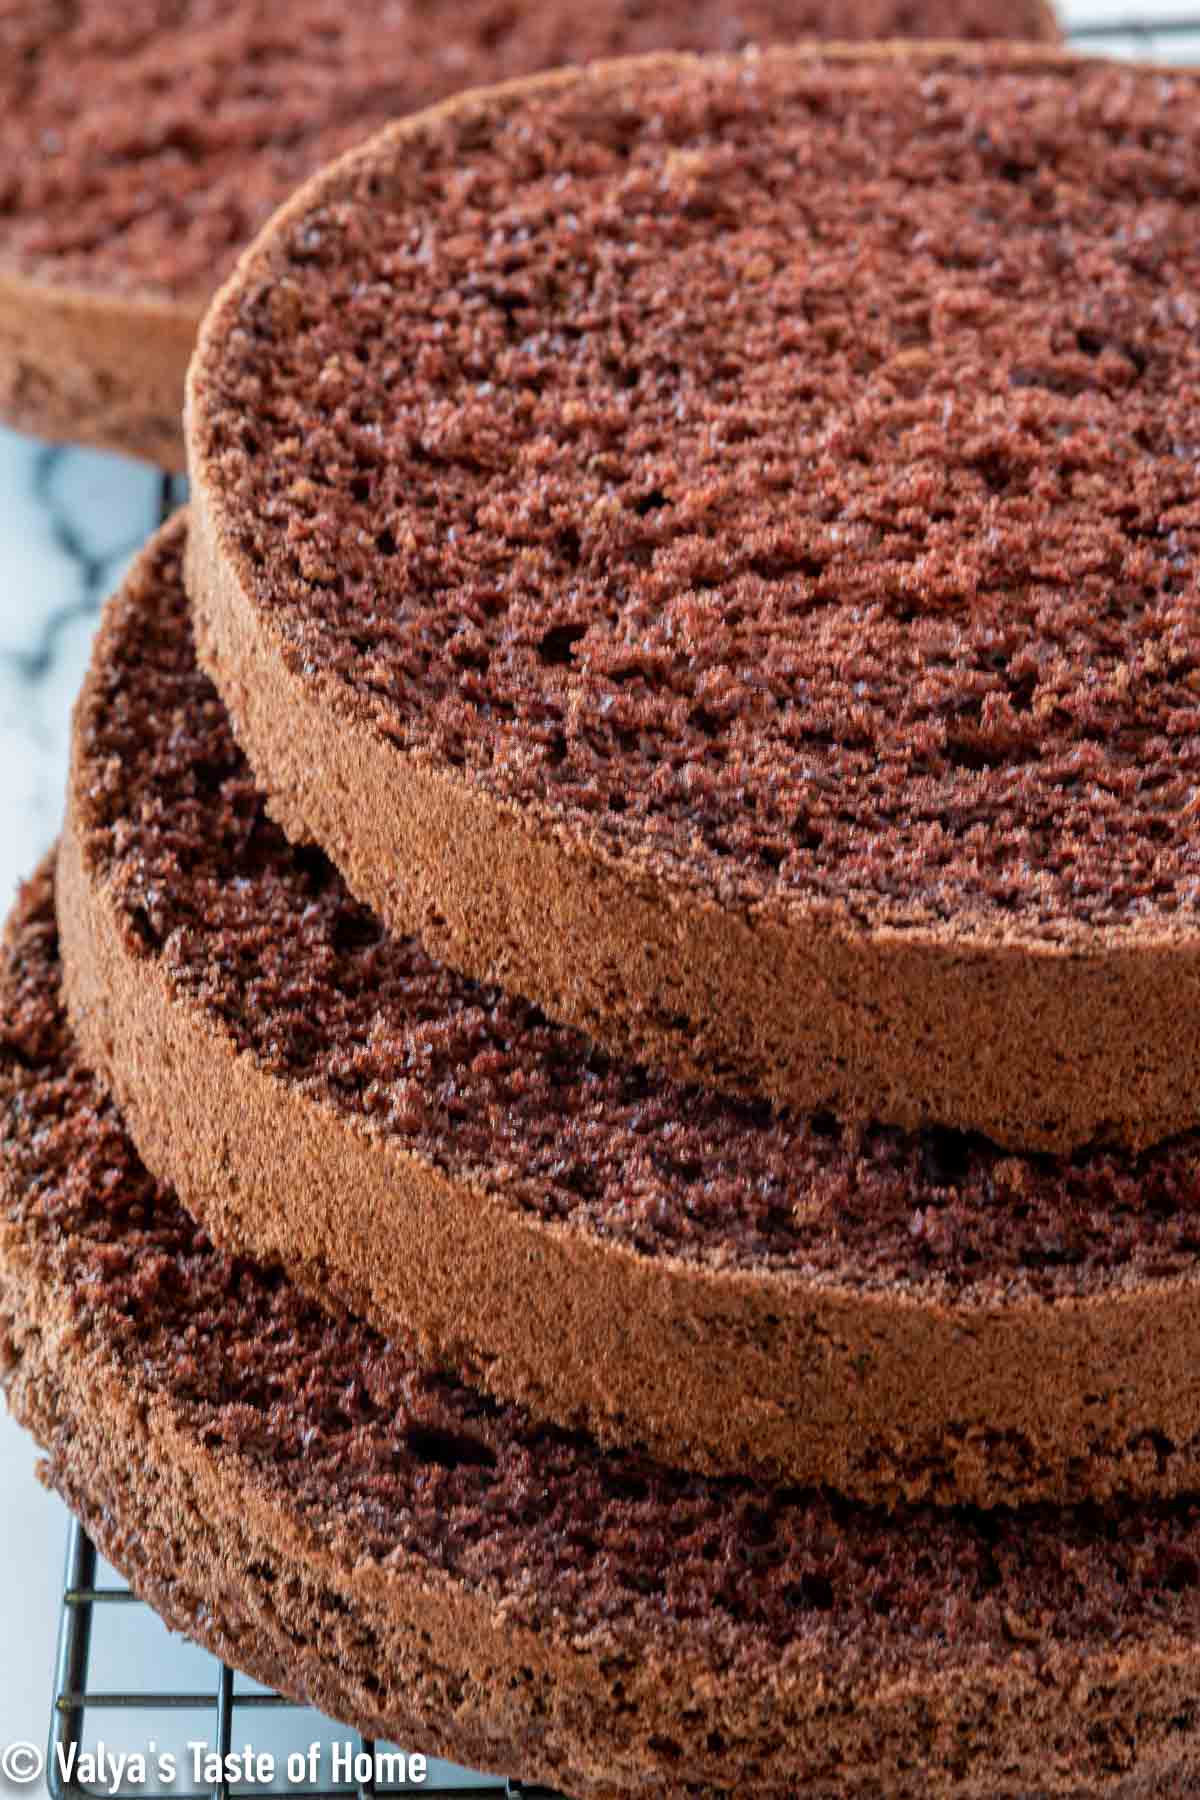 7 Ways to Keep a Cake From Falling After Baking